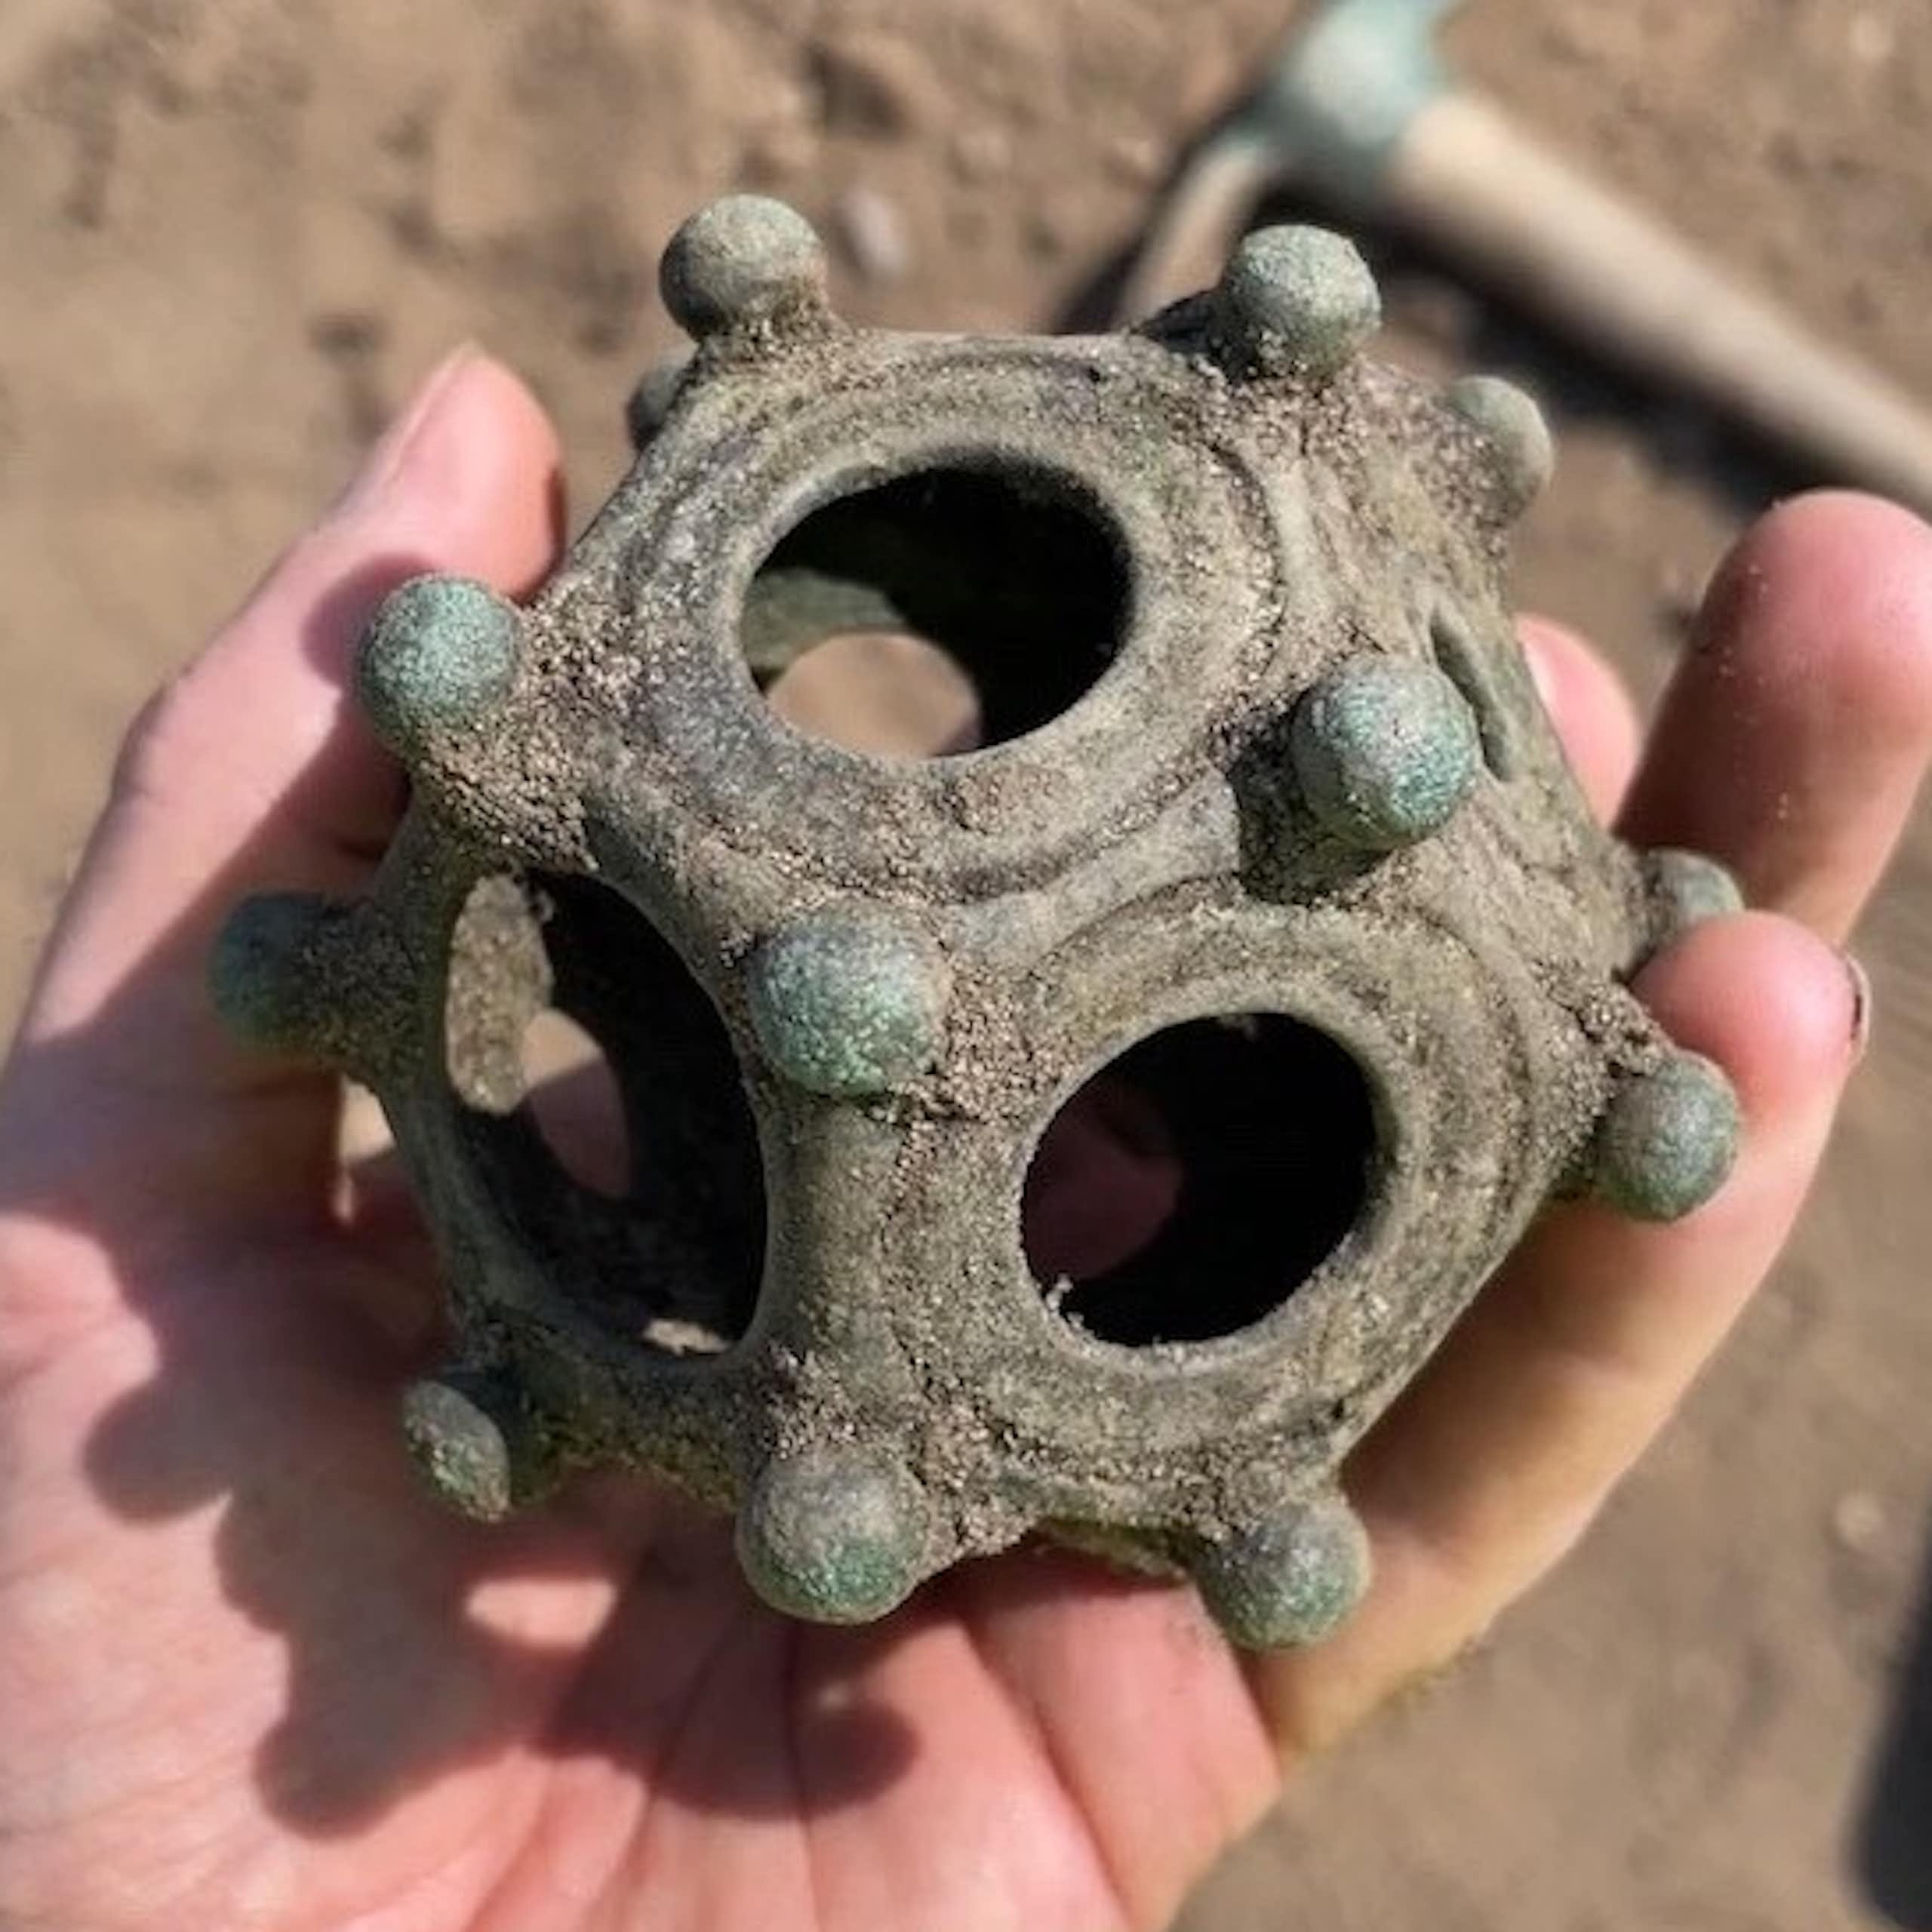 Beautifully crafted Roman dodecahedron discovered in Lincoln – but what were they for?